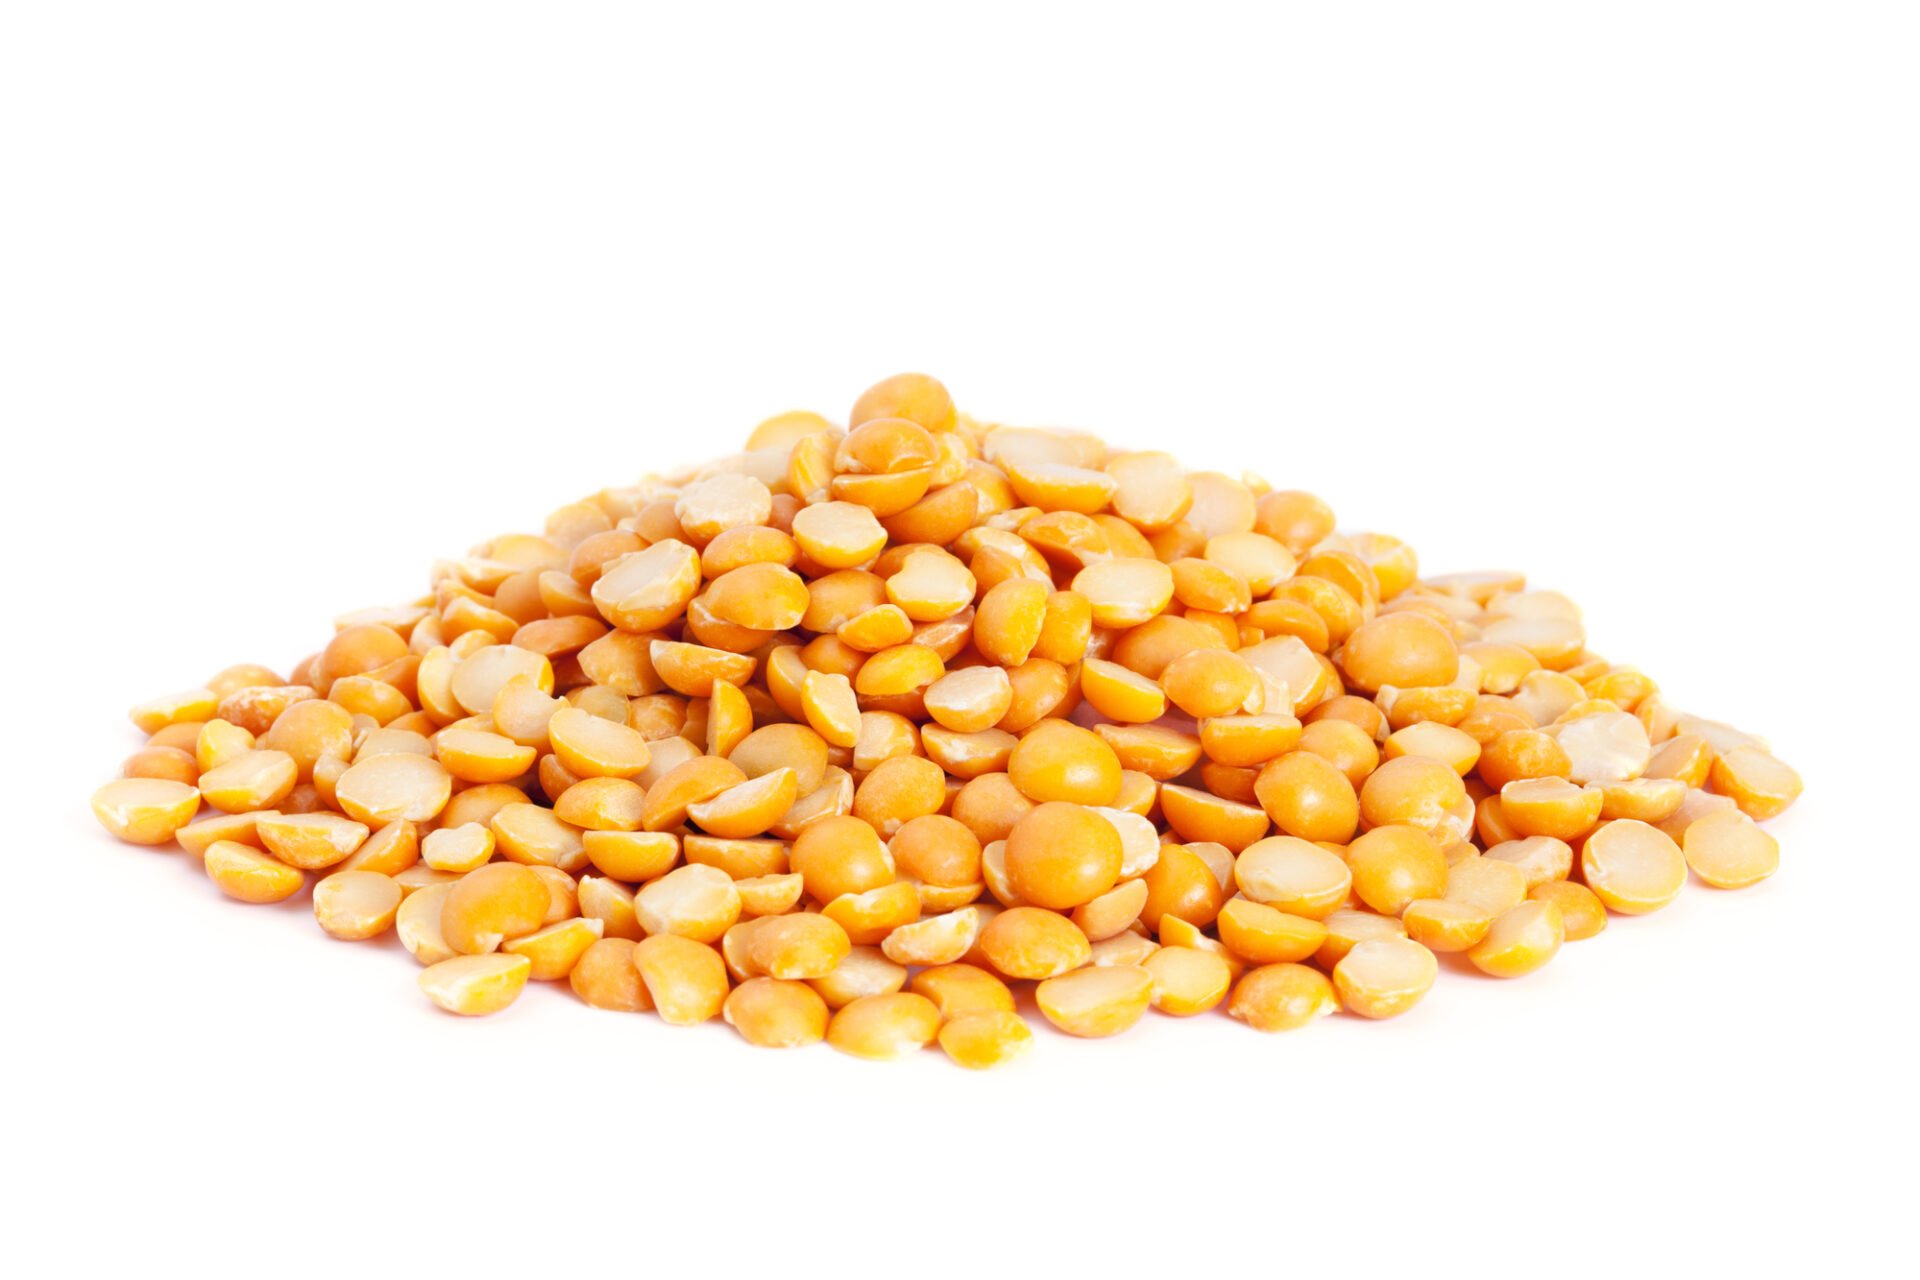 Pile dry split yellow peas isolated on white background